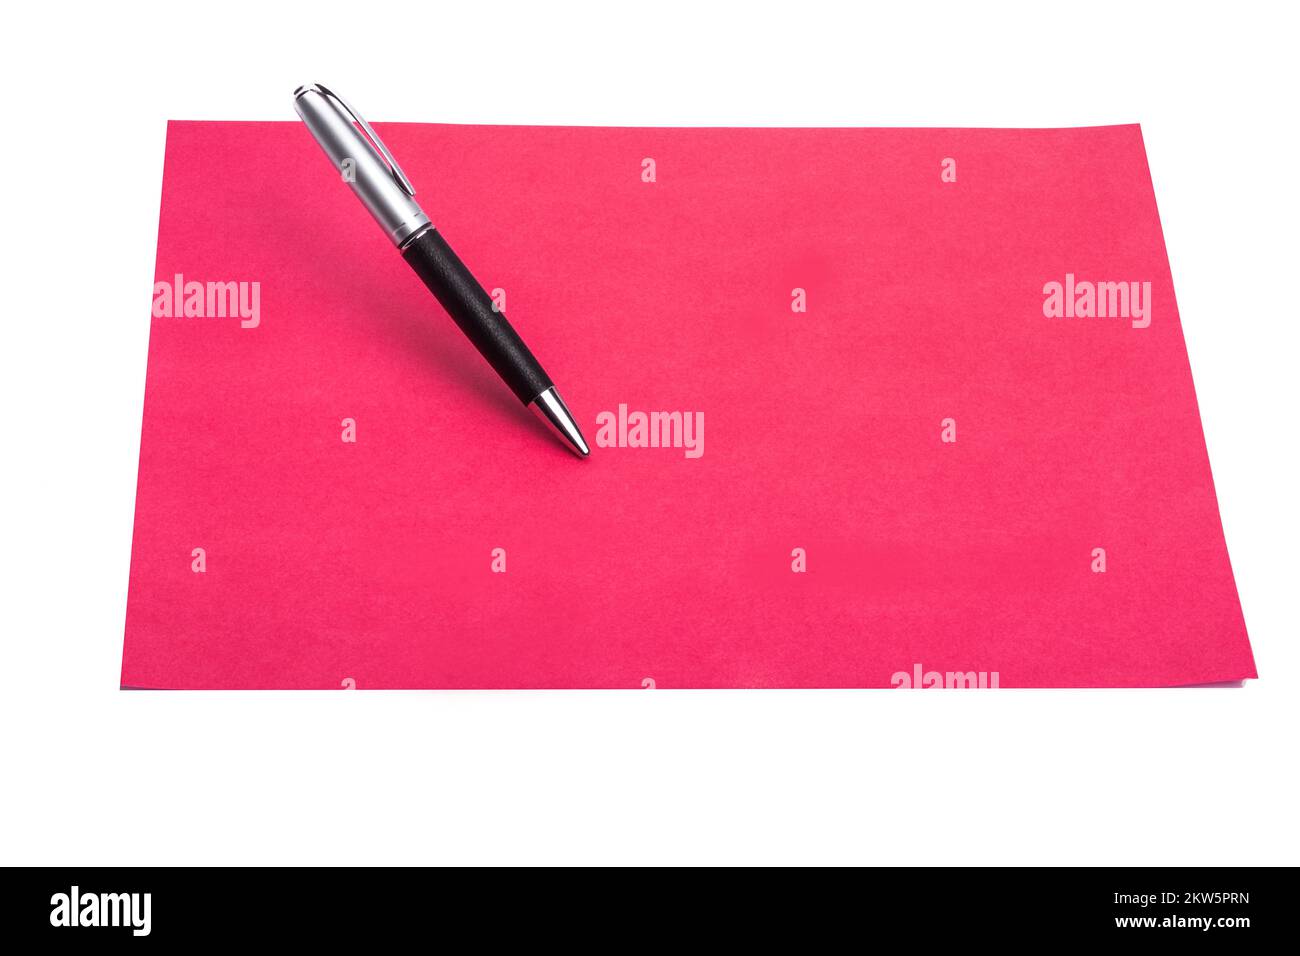 Pen and plain color paper on an isolated background Stock Photo